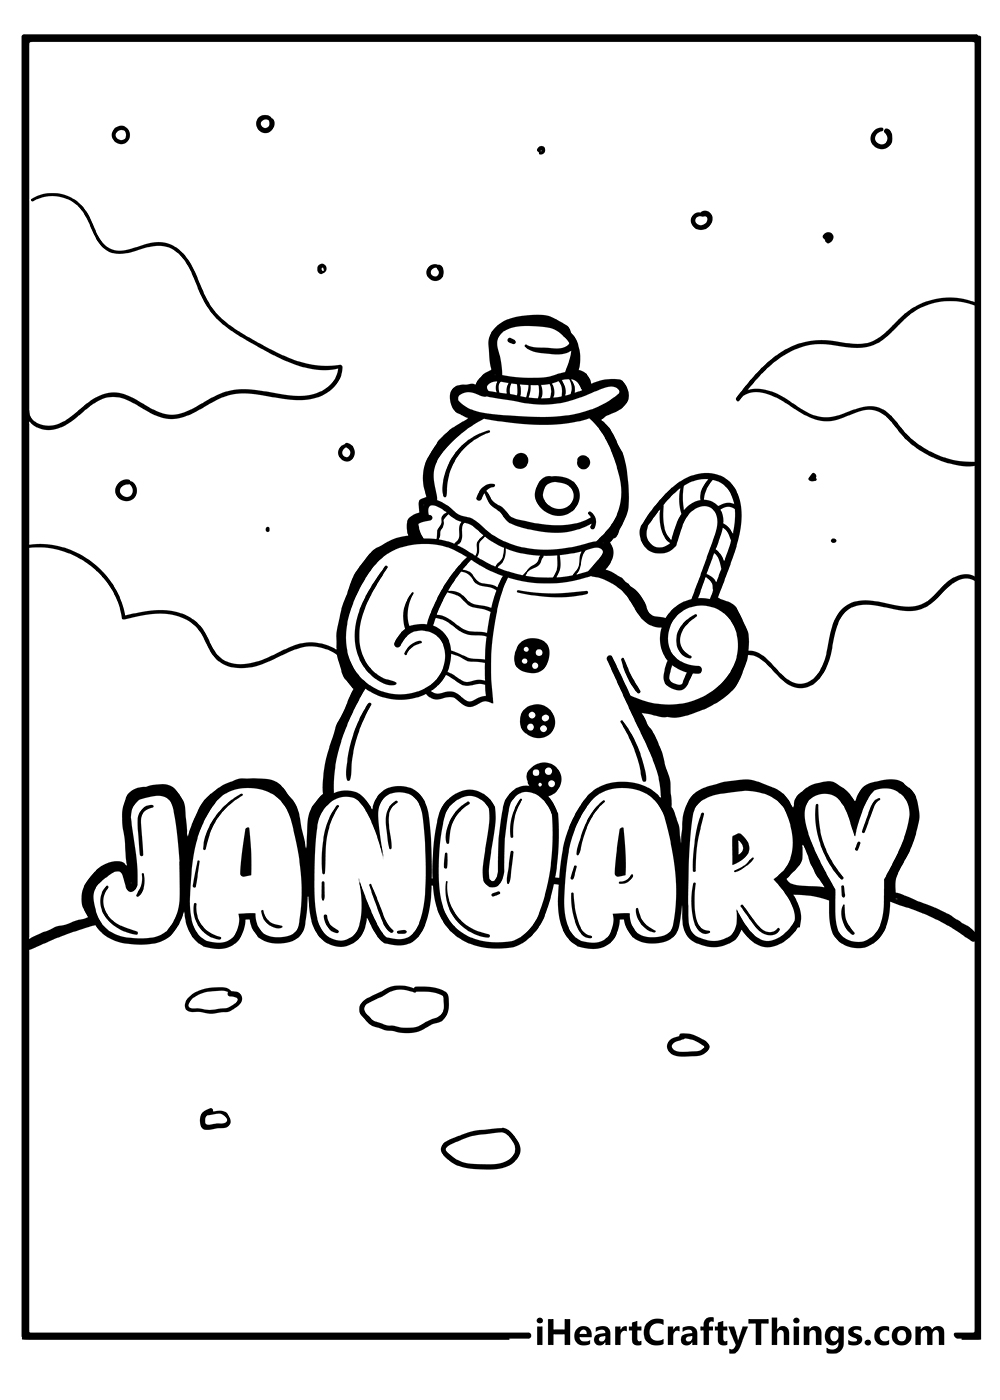 January Coloring Pages for preschoolers free printable